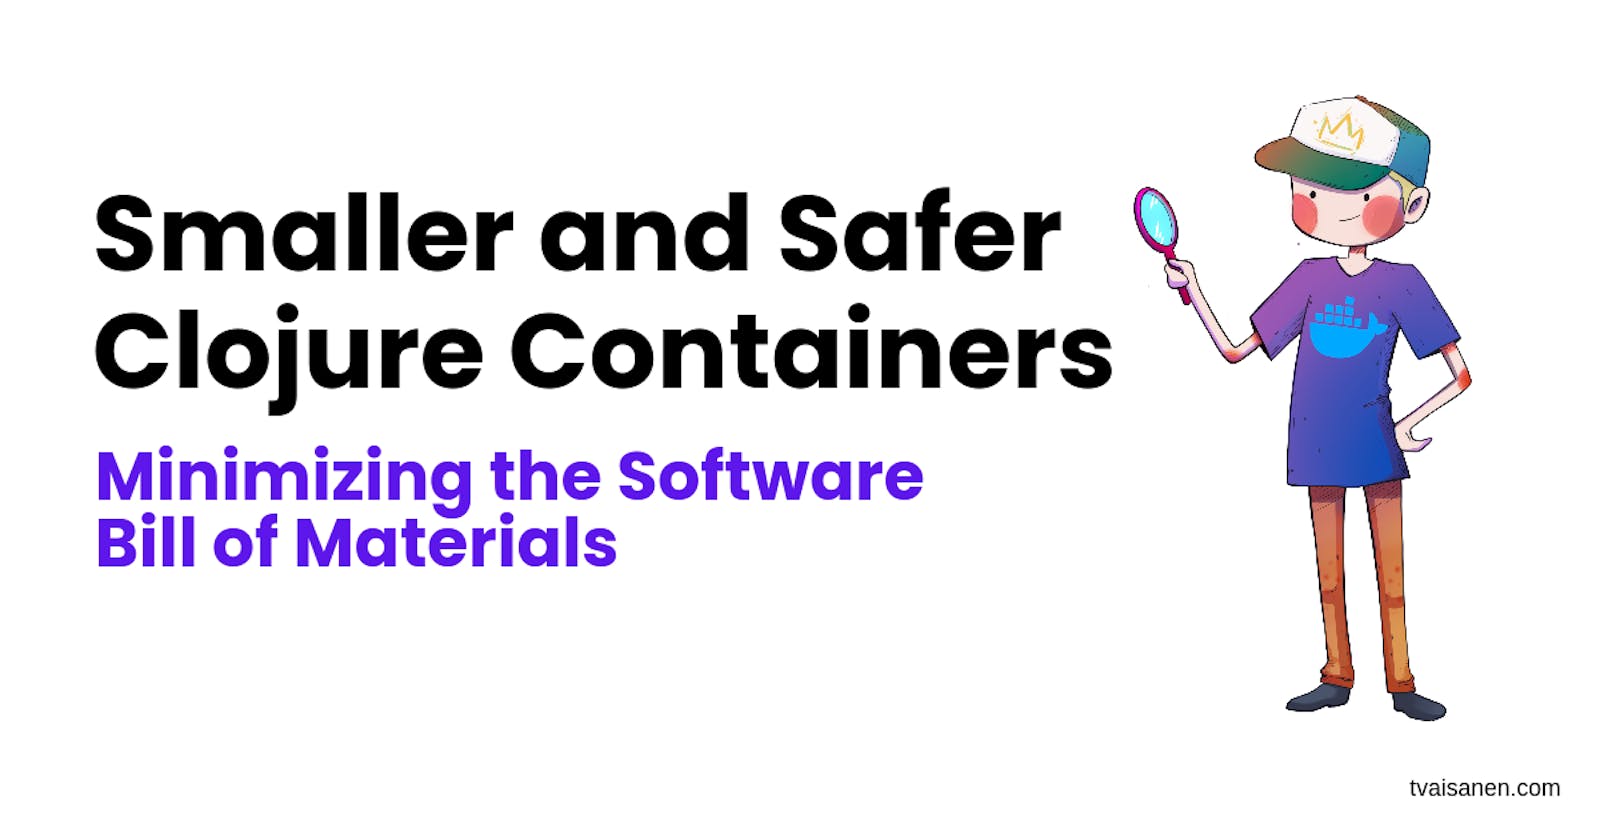 Smaller and Safer Clojure Containers: Minimizing the Software Bill of Materials